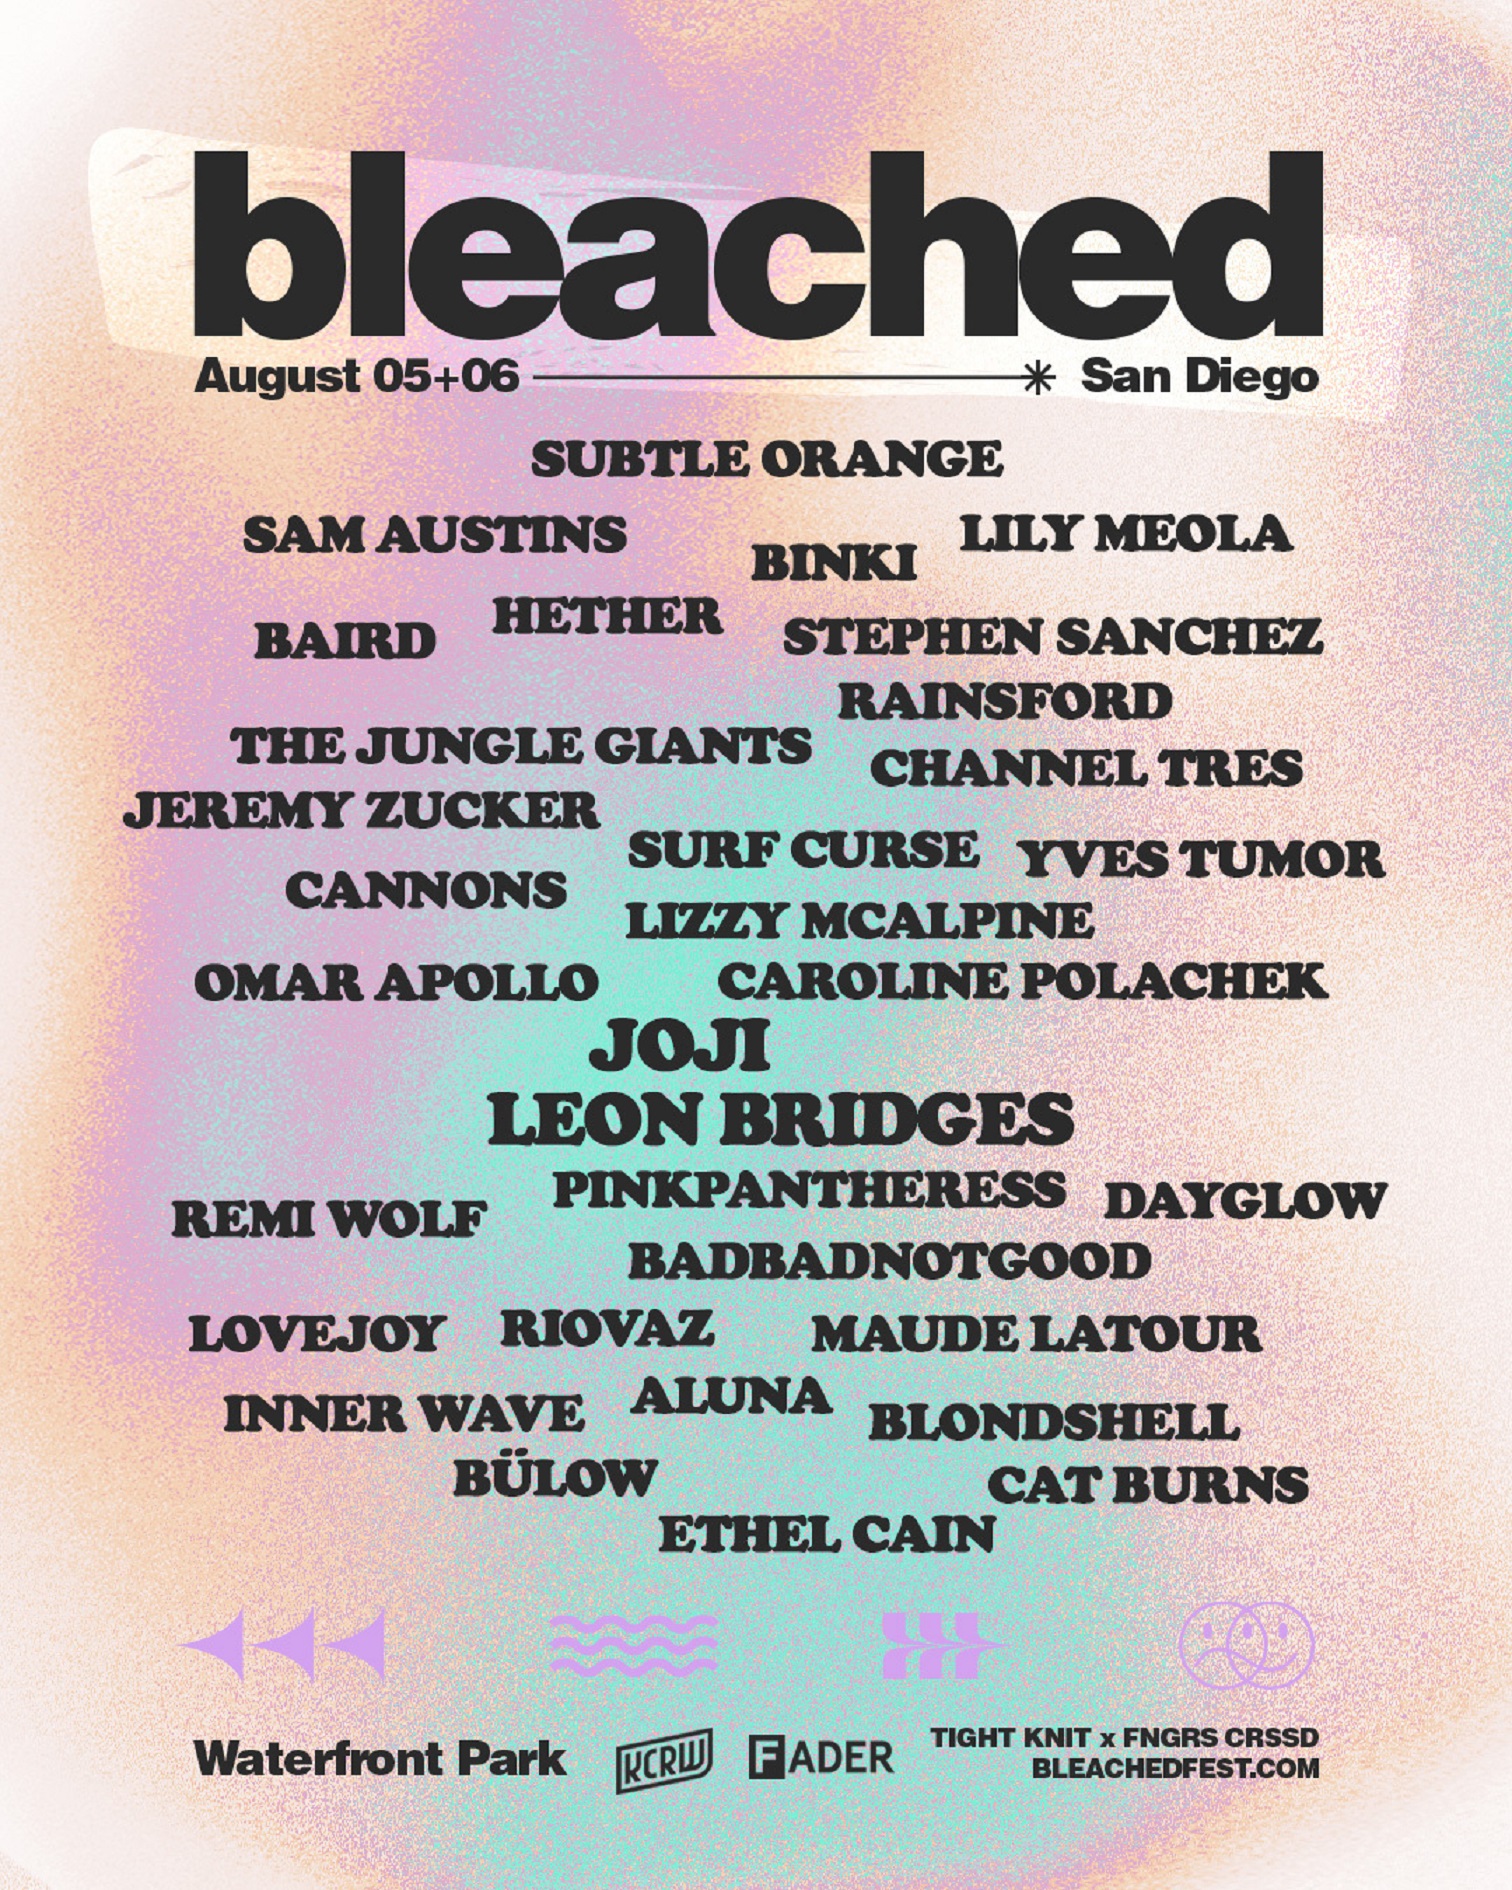 Bleached Debut Festival Announces Phase Two Lineup